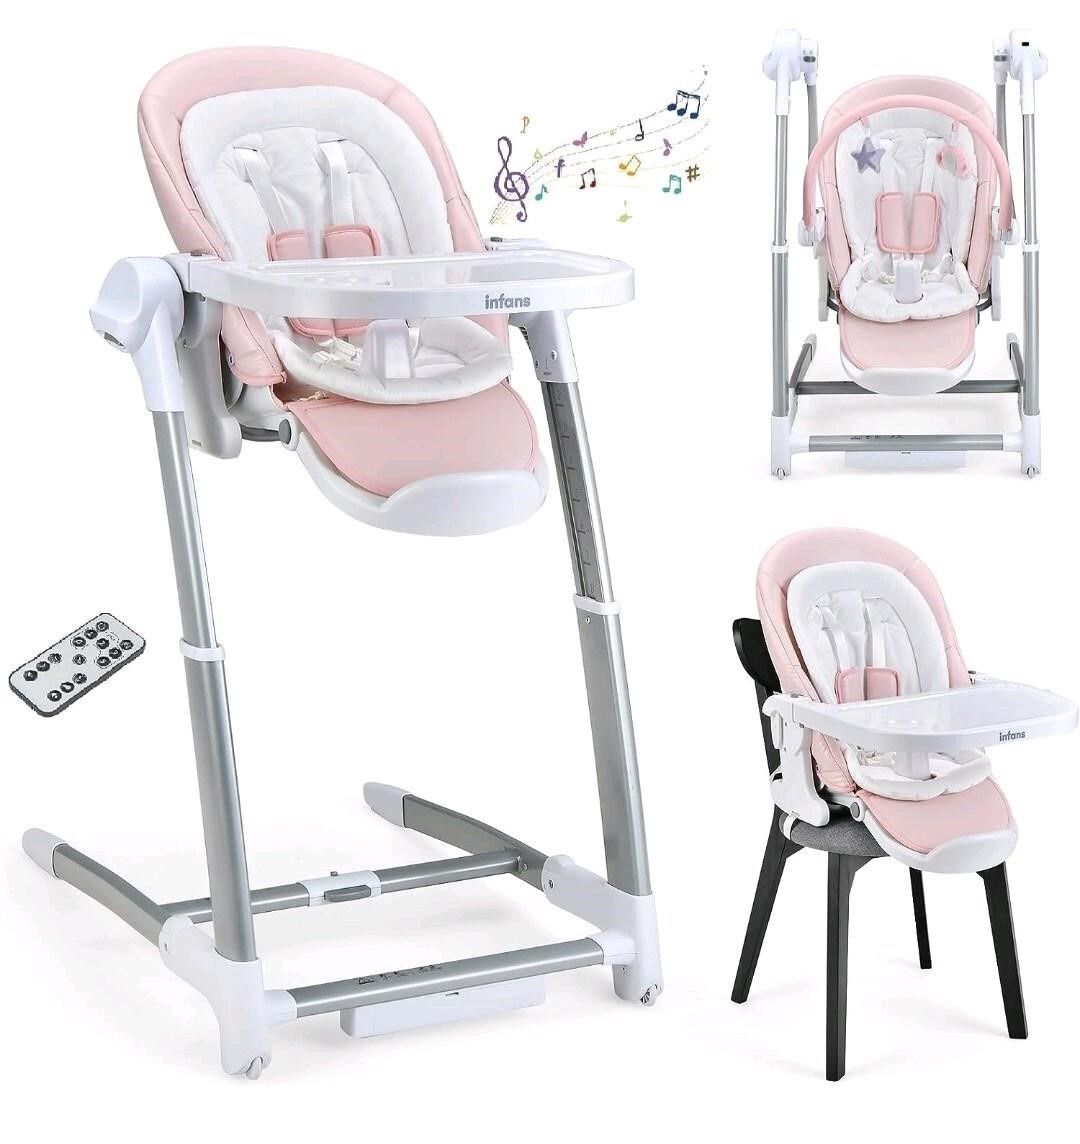 INFANS 3 in 1 Baby High Chair, Electric Baby Swing